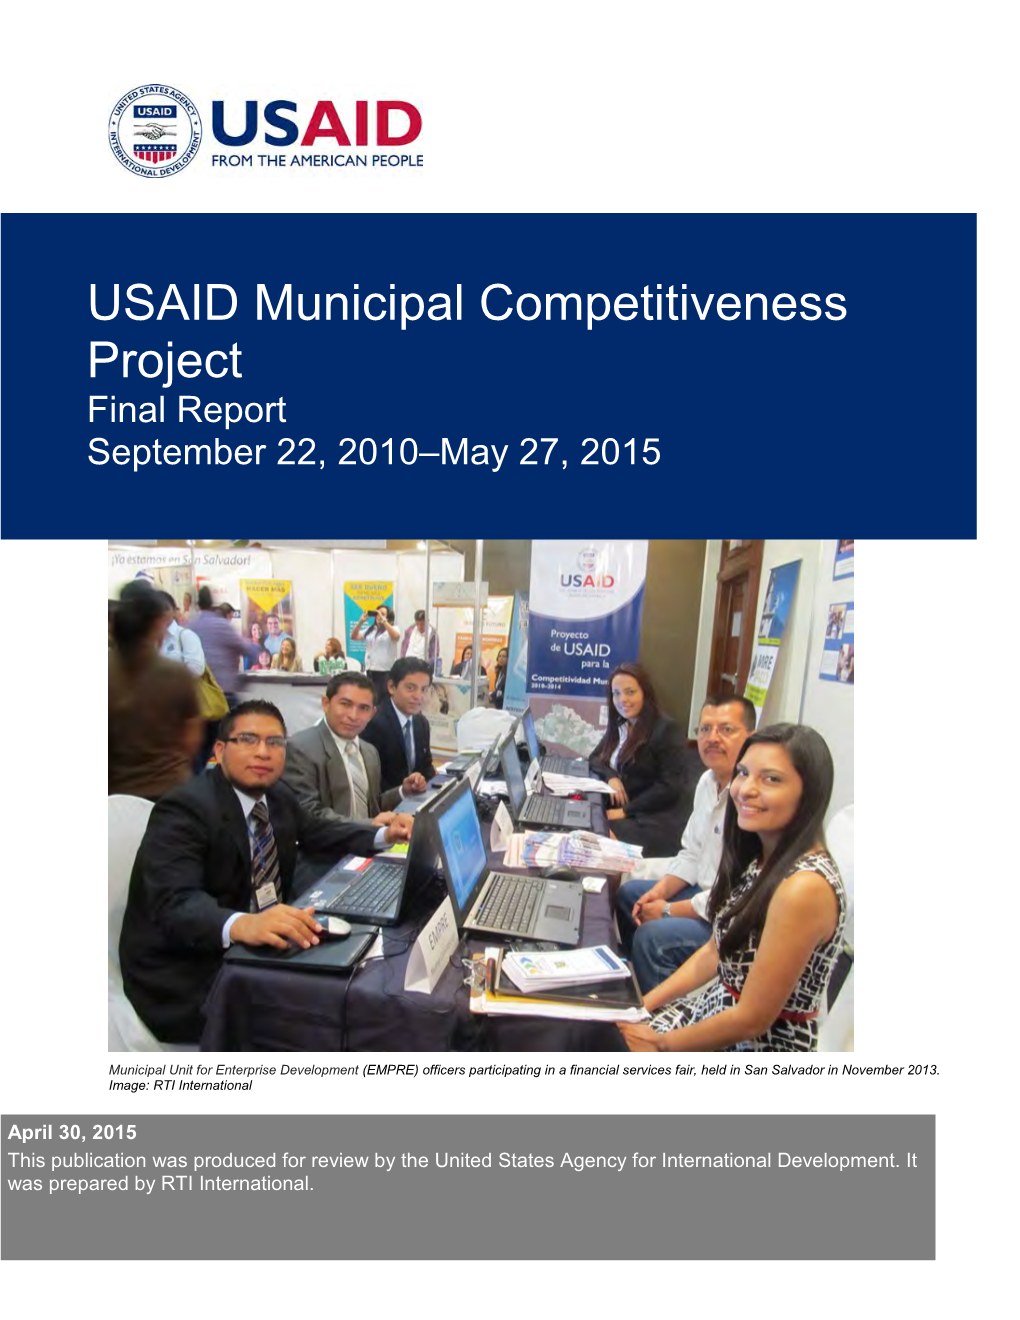 USAID Municipal Competitiveness Project Final Report September 22, 2010–May 27, 2015